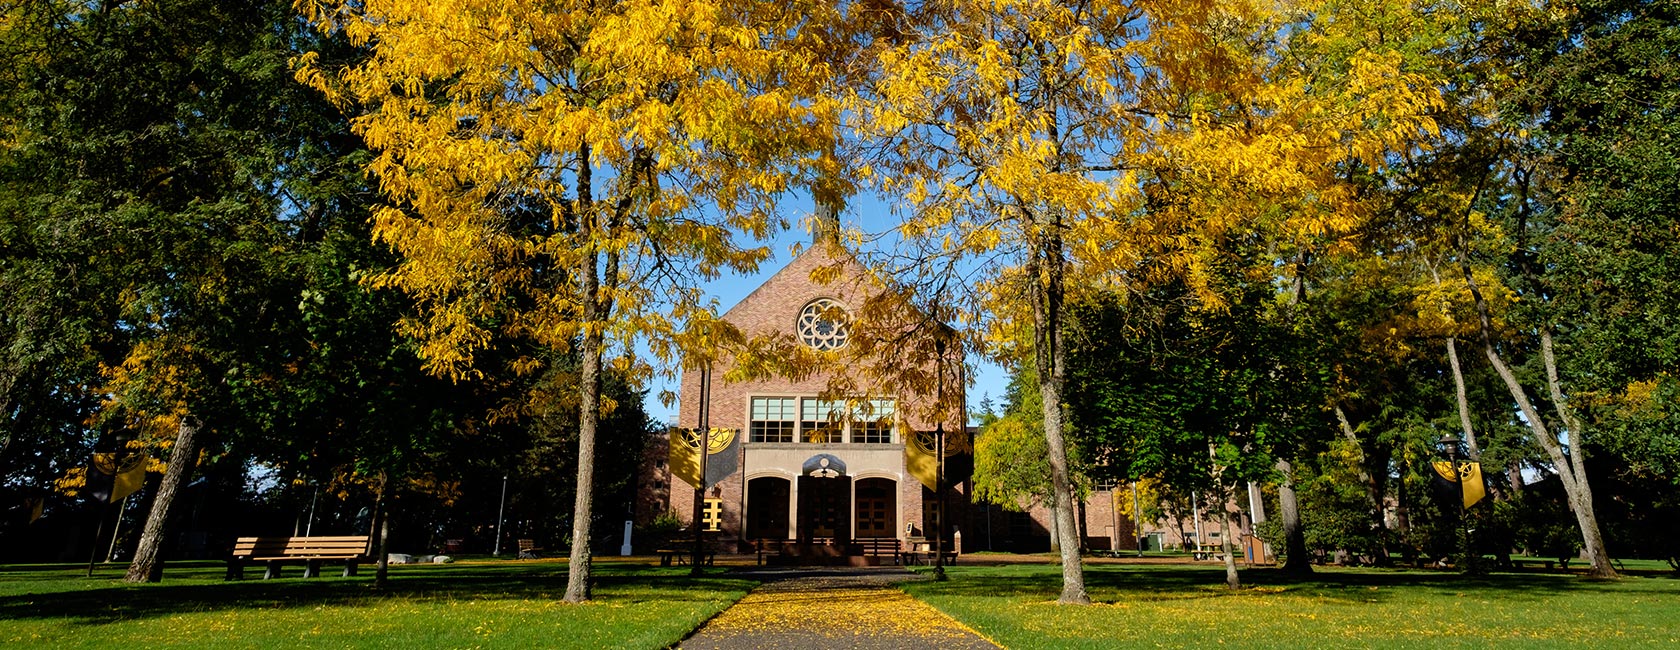 Fall on the campus of Pacific Lutheran University